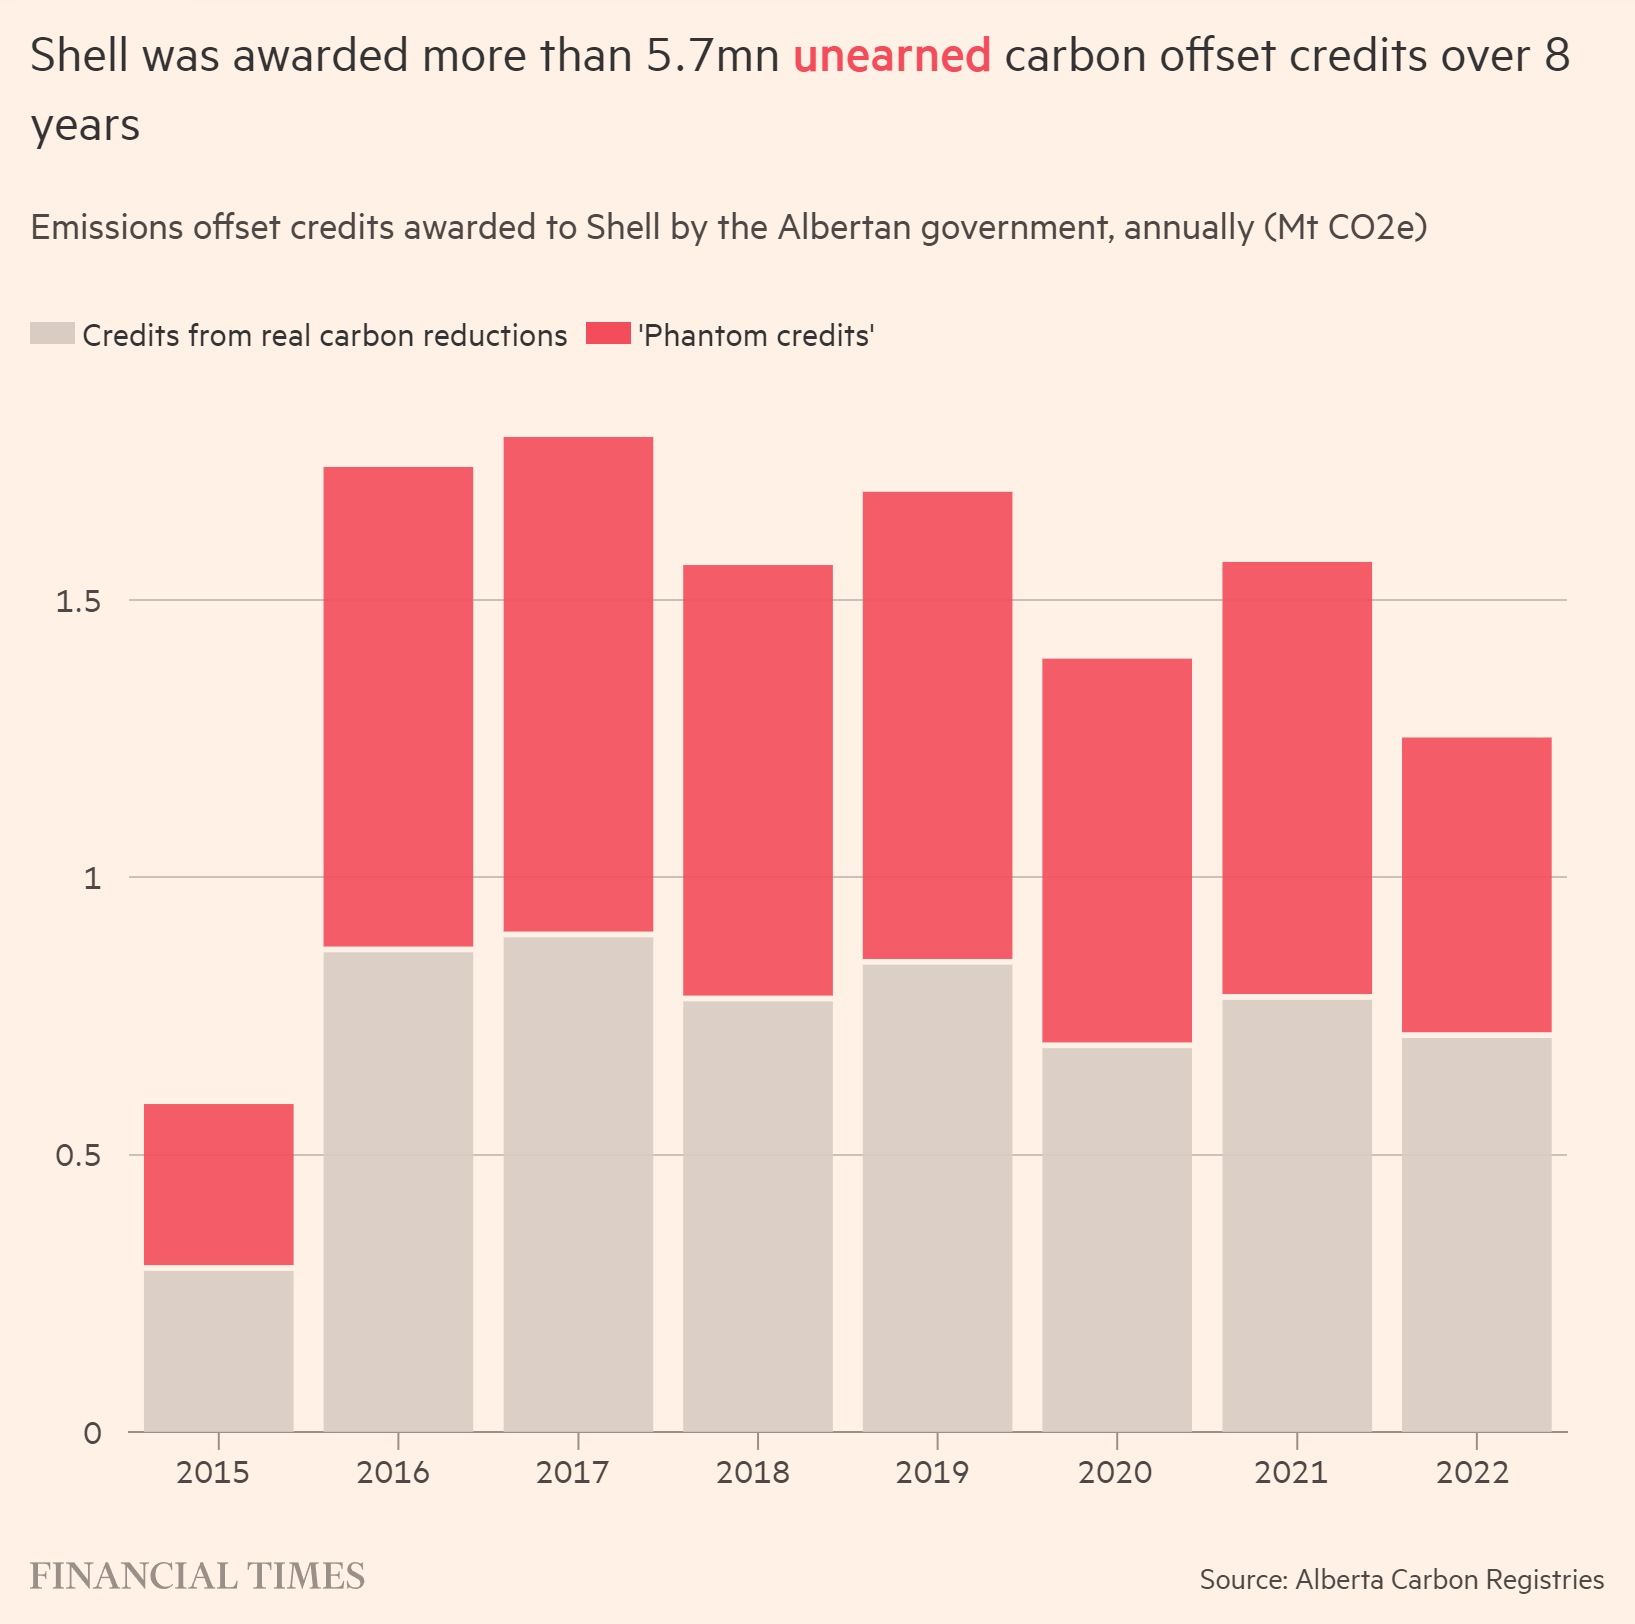 Emissions offset credits awarded to Shell by the Albertan government (Mt CO2e), 2015-2022. Shell was awarded more than 5.7 million unearned carbon offset credits over 8 years. Data: Alberta Carbon Registries. Graphic: Financial Times